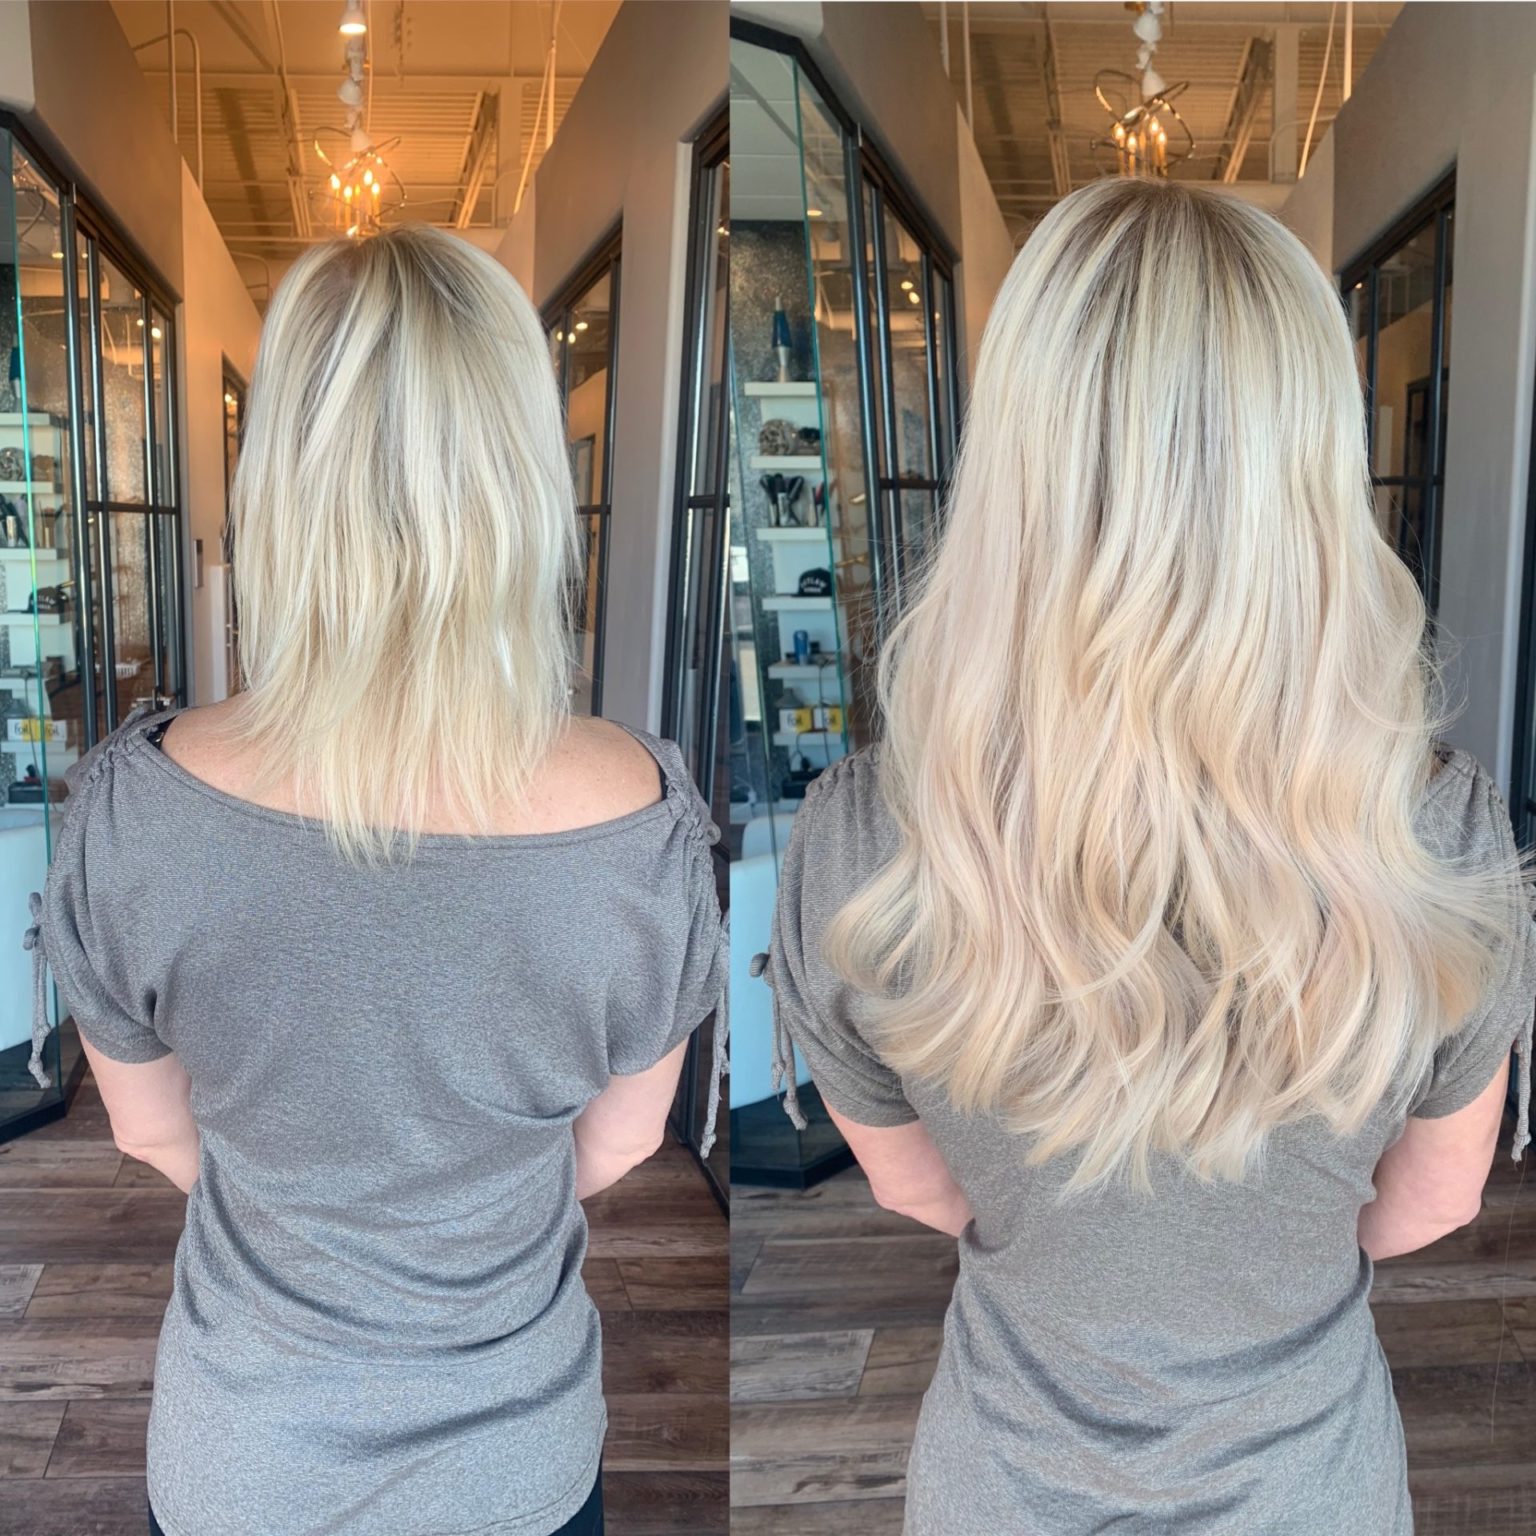 Great Lengths Hair Extensions Denver : How are they different?